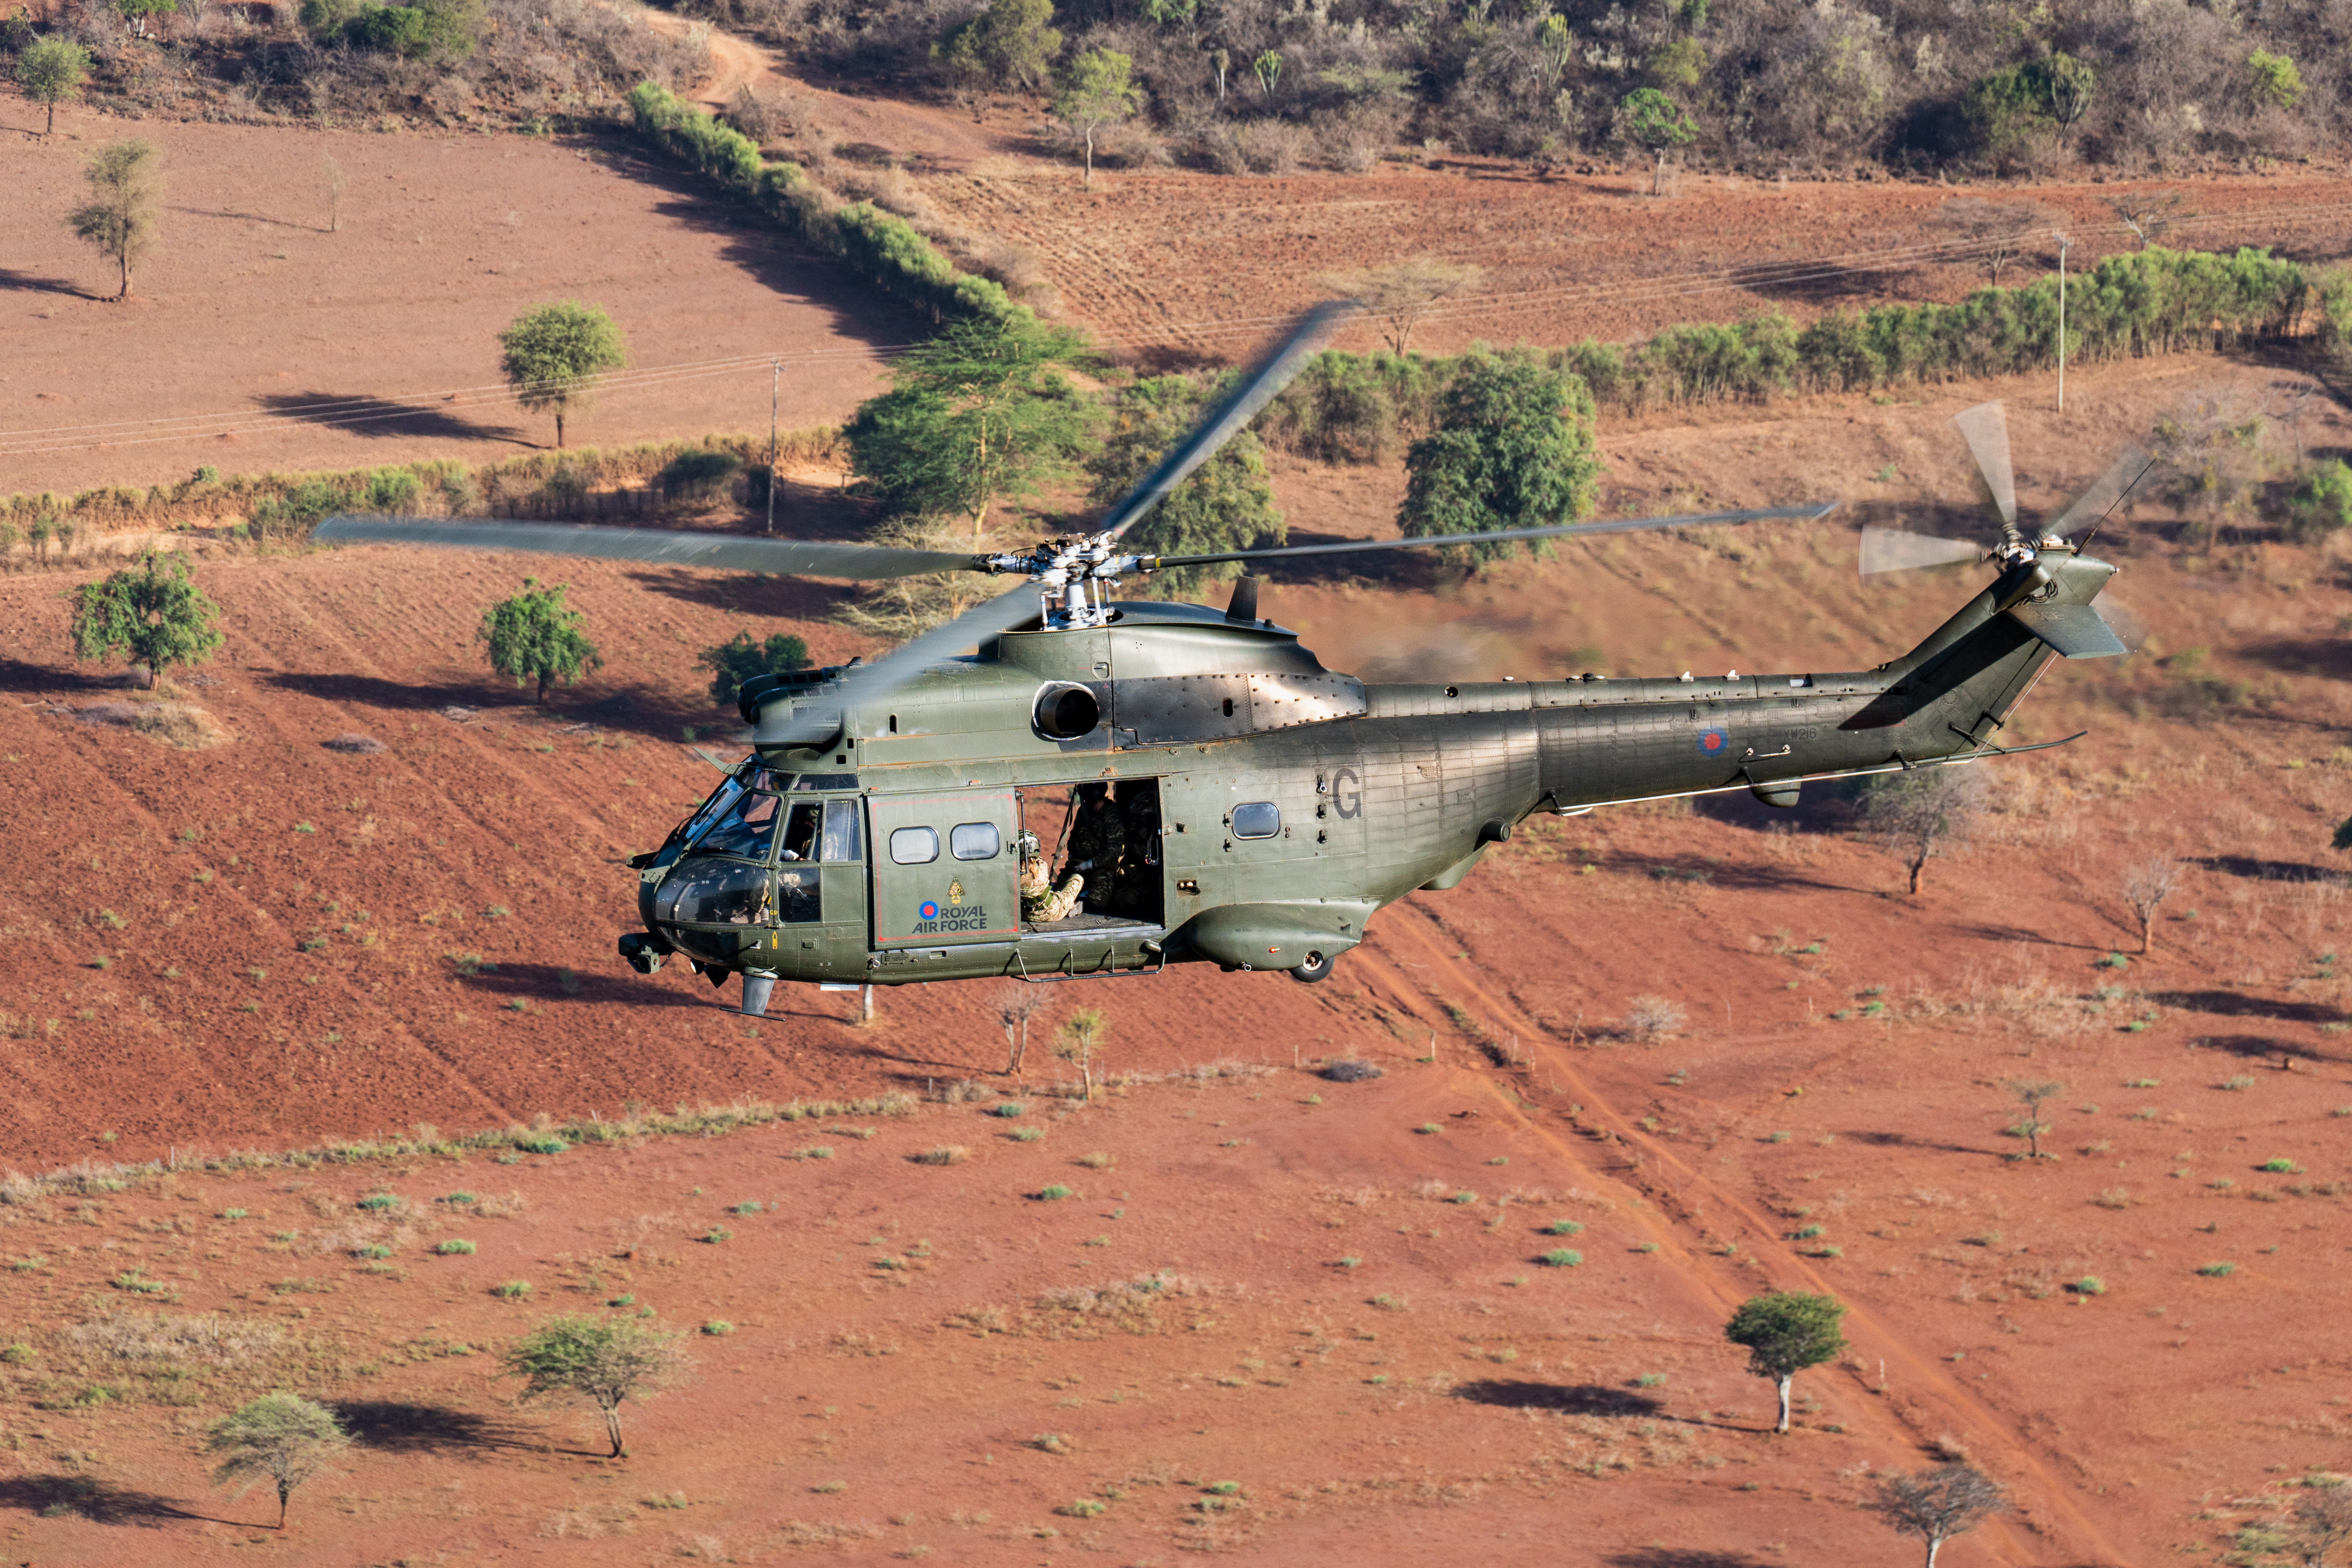 A Puma helicopter flies at low level across the Kenya desert, with small lined areas of trees visible amongst the almost red-looking sand.